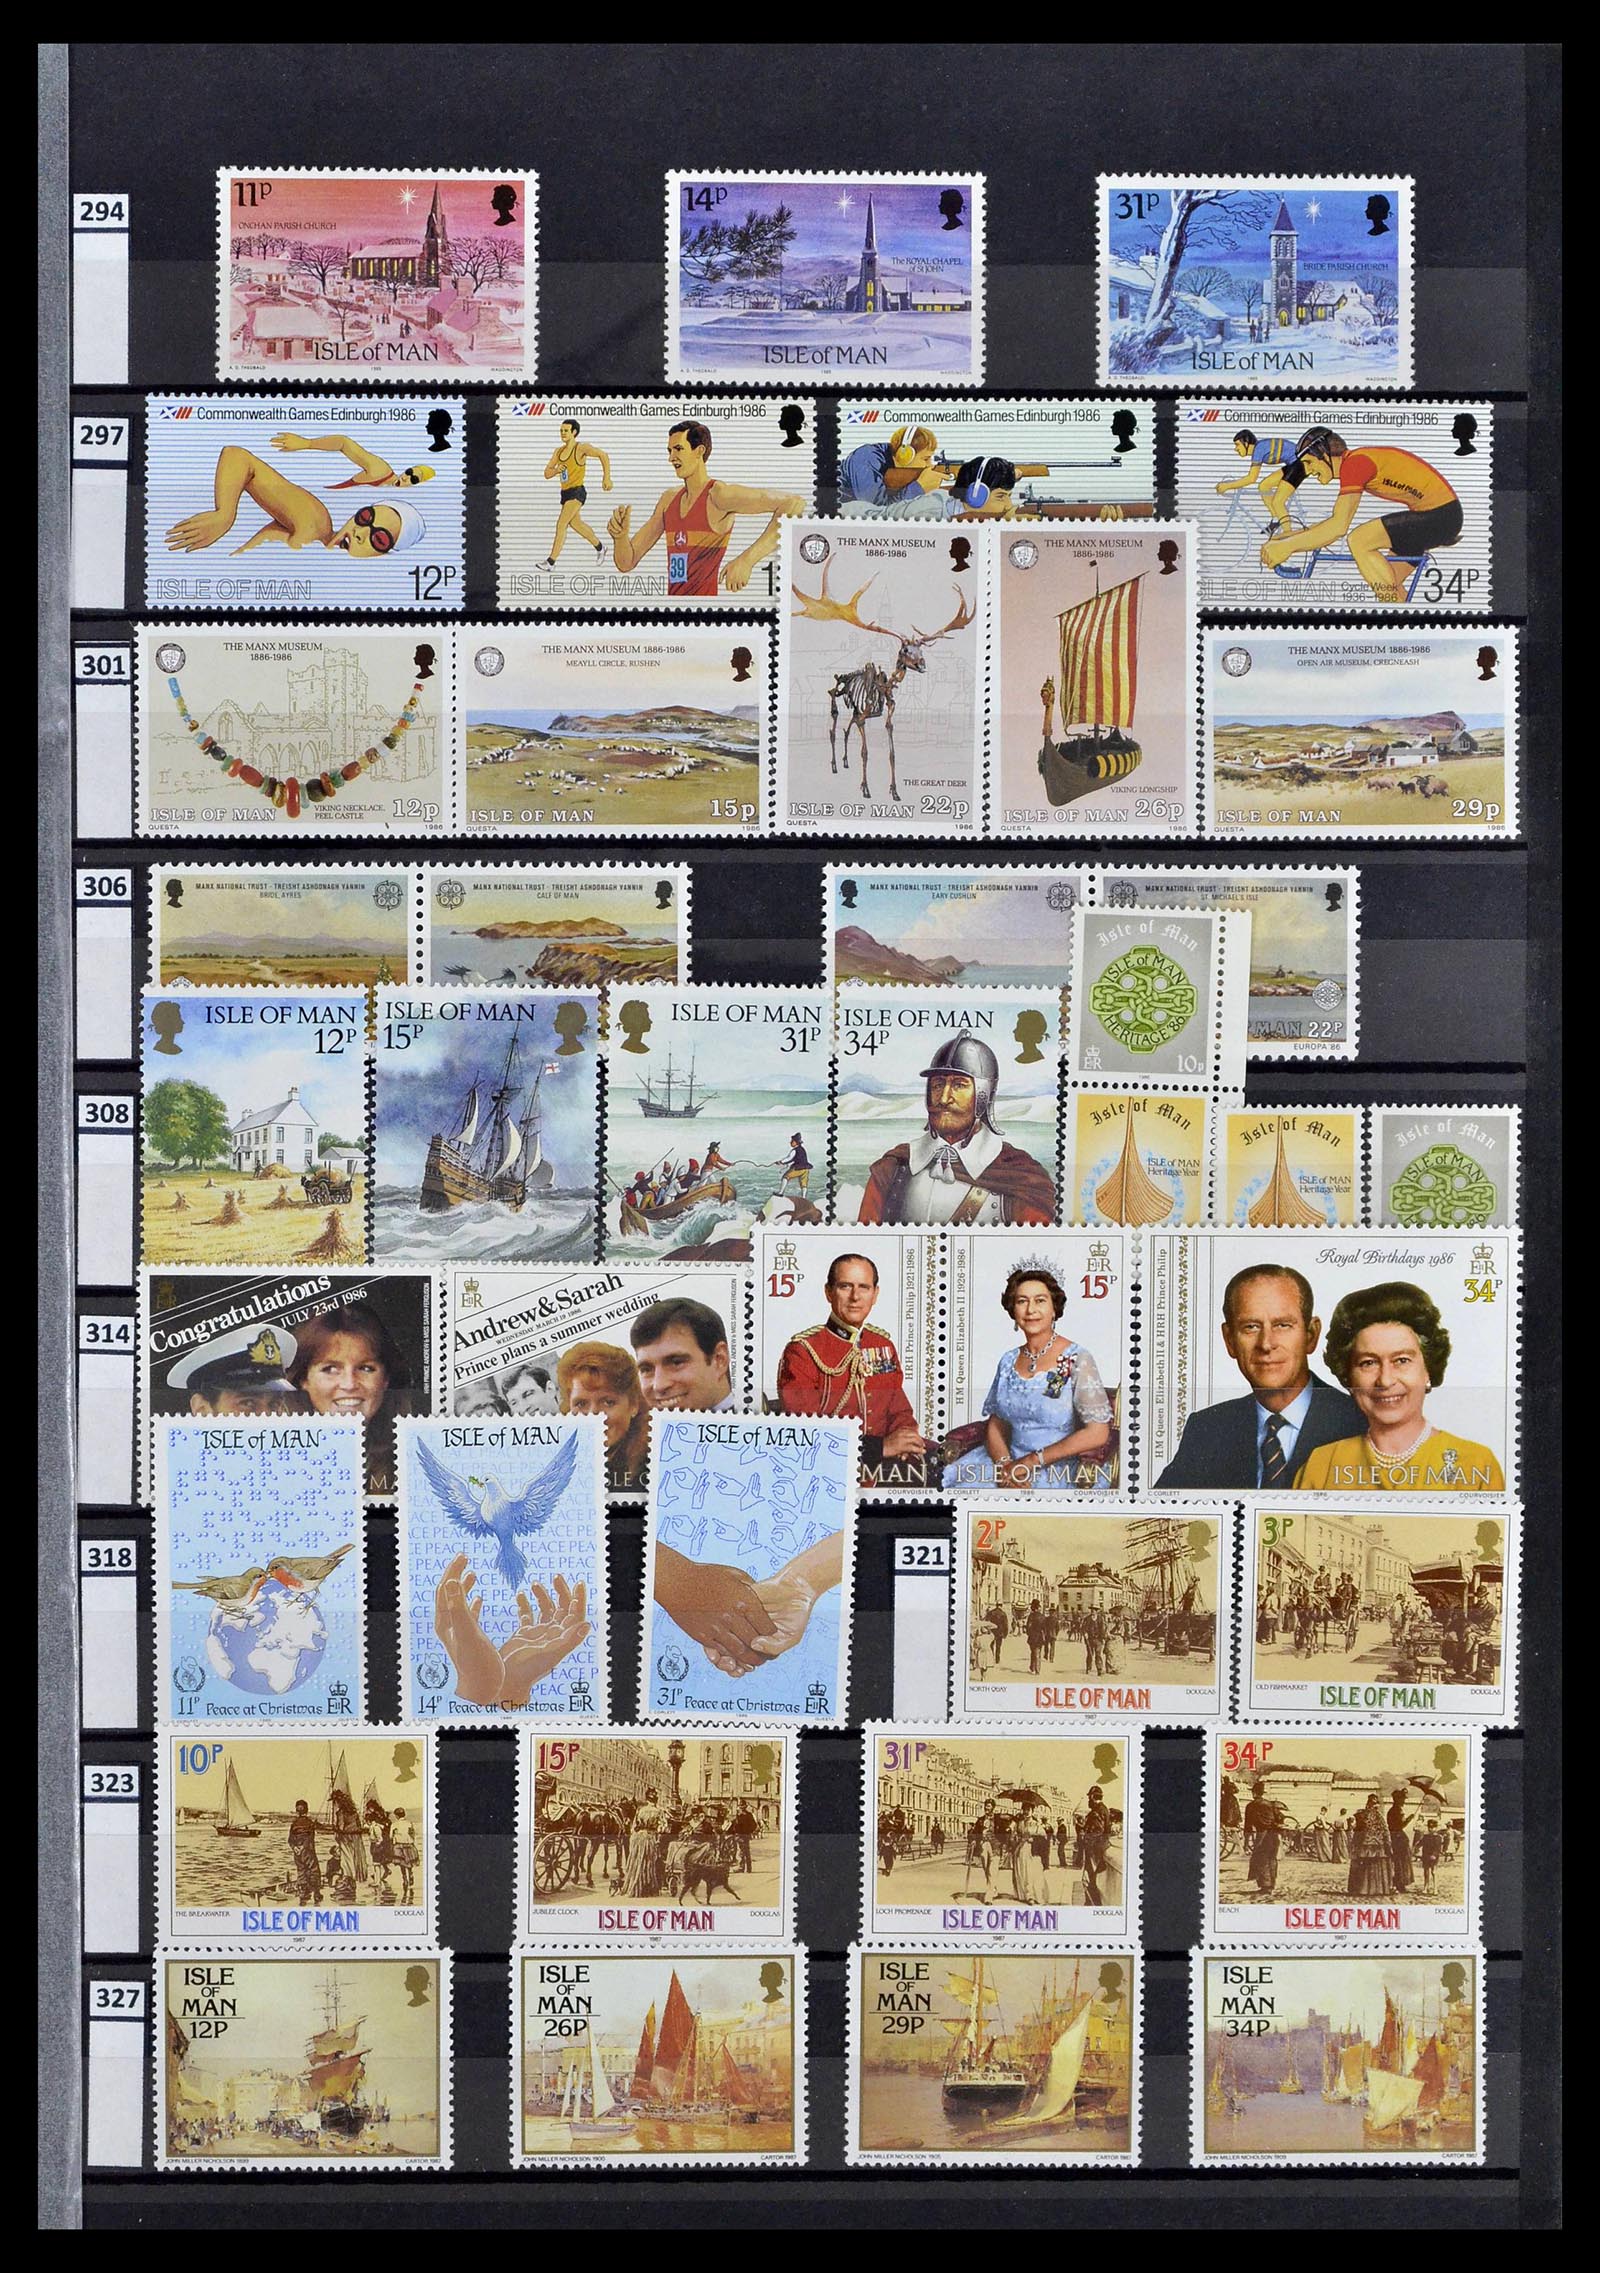 39197 0112 - Stamp collection 39197 Channel Islands 1941-2015.